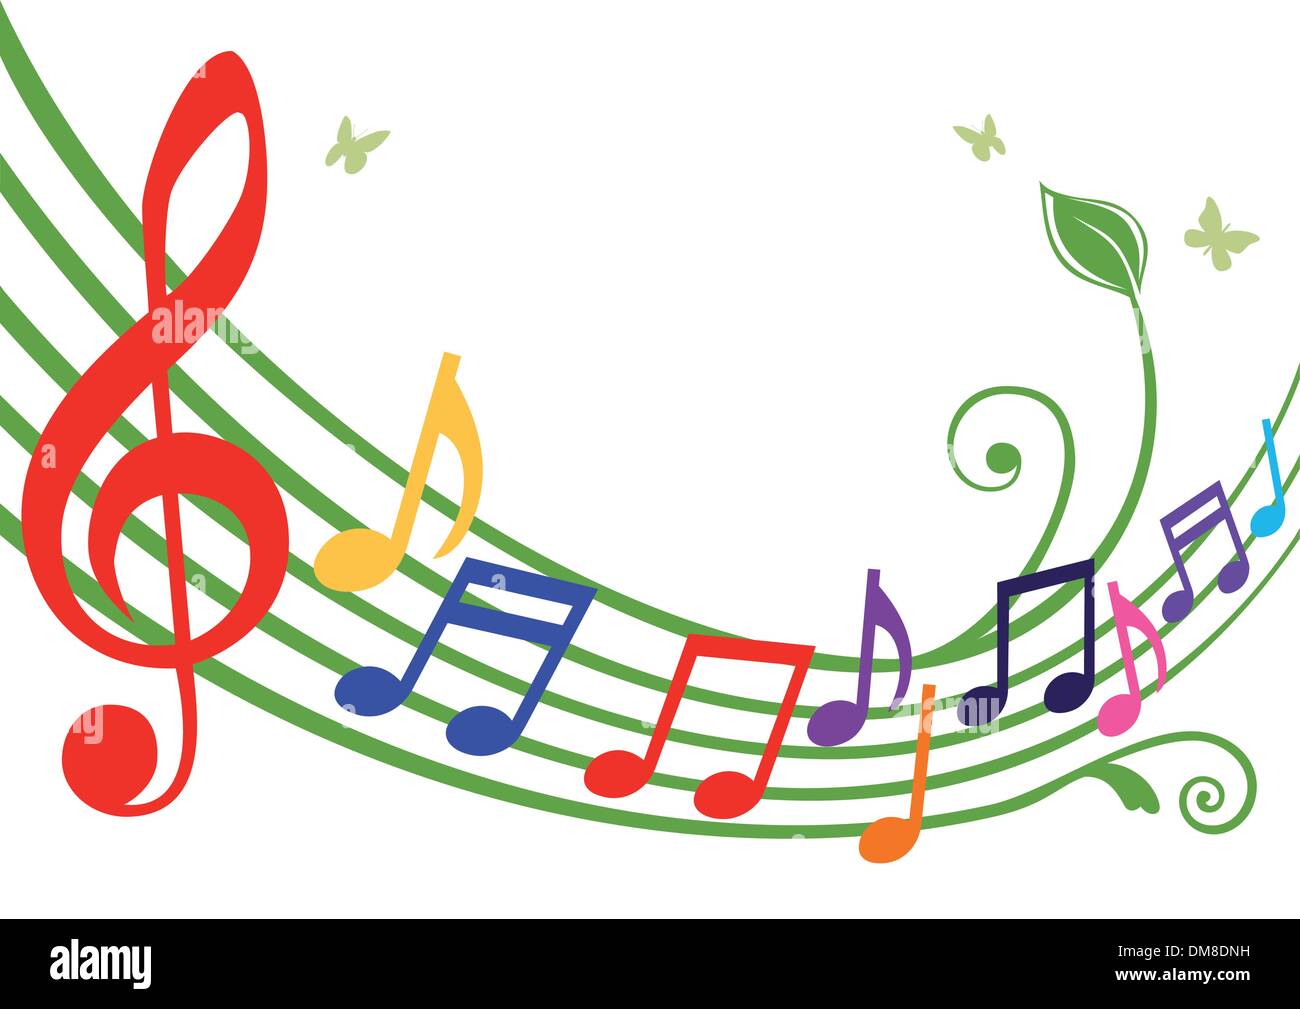 colorful music notes images